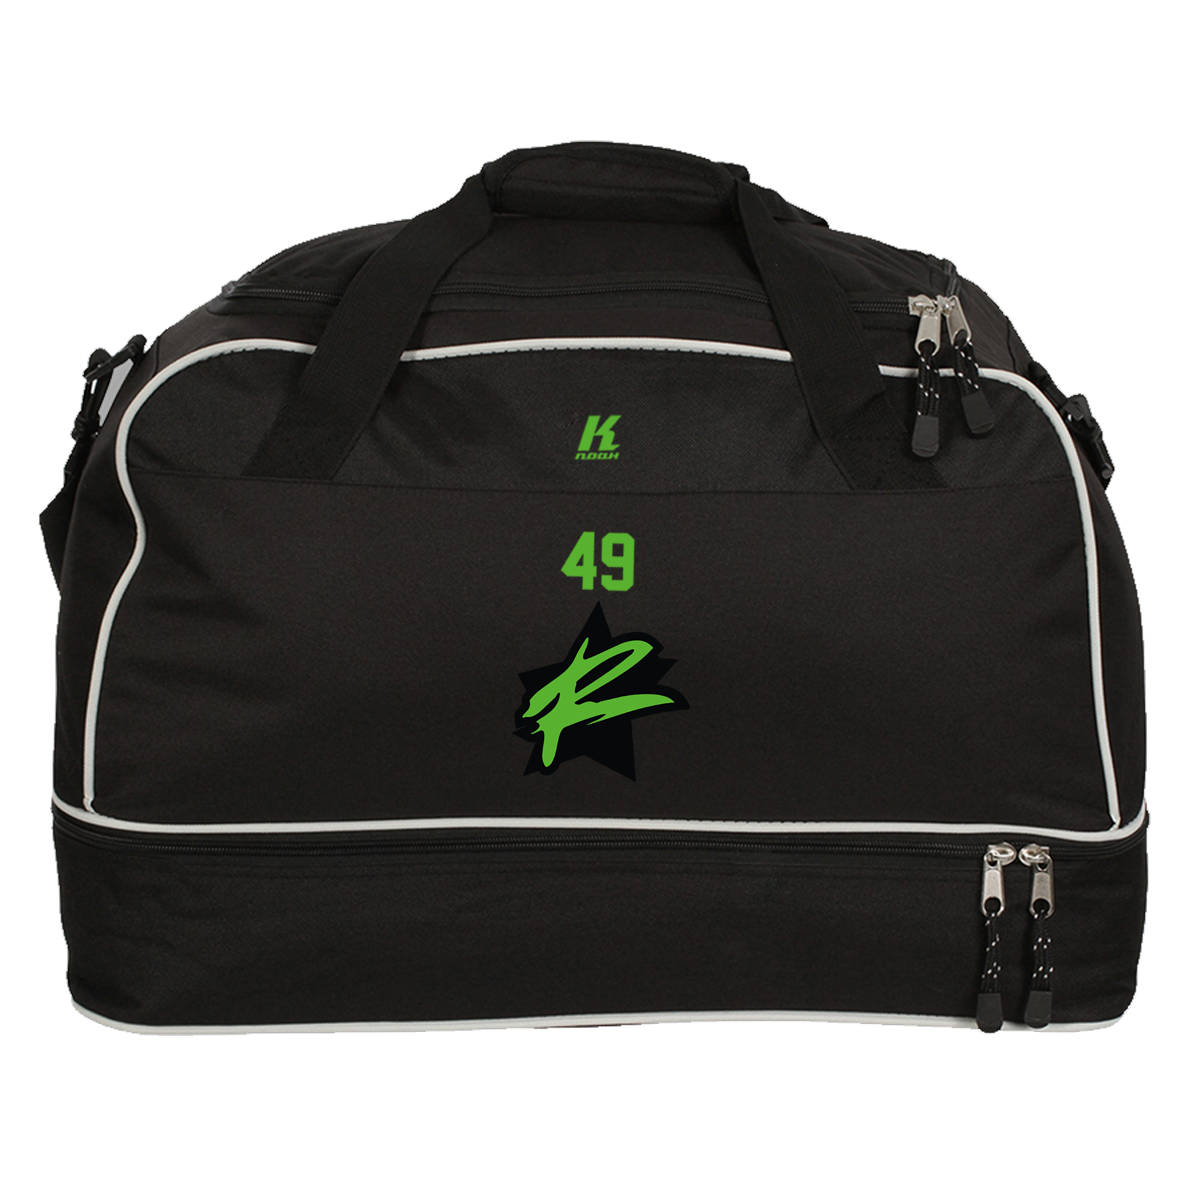 Rebels Players CT Bag with Playernumber or Initials